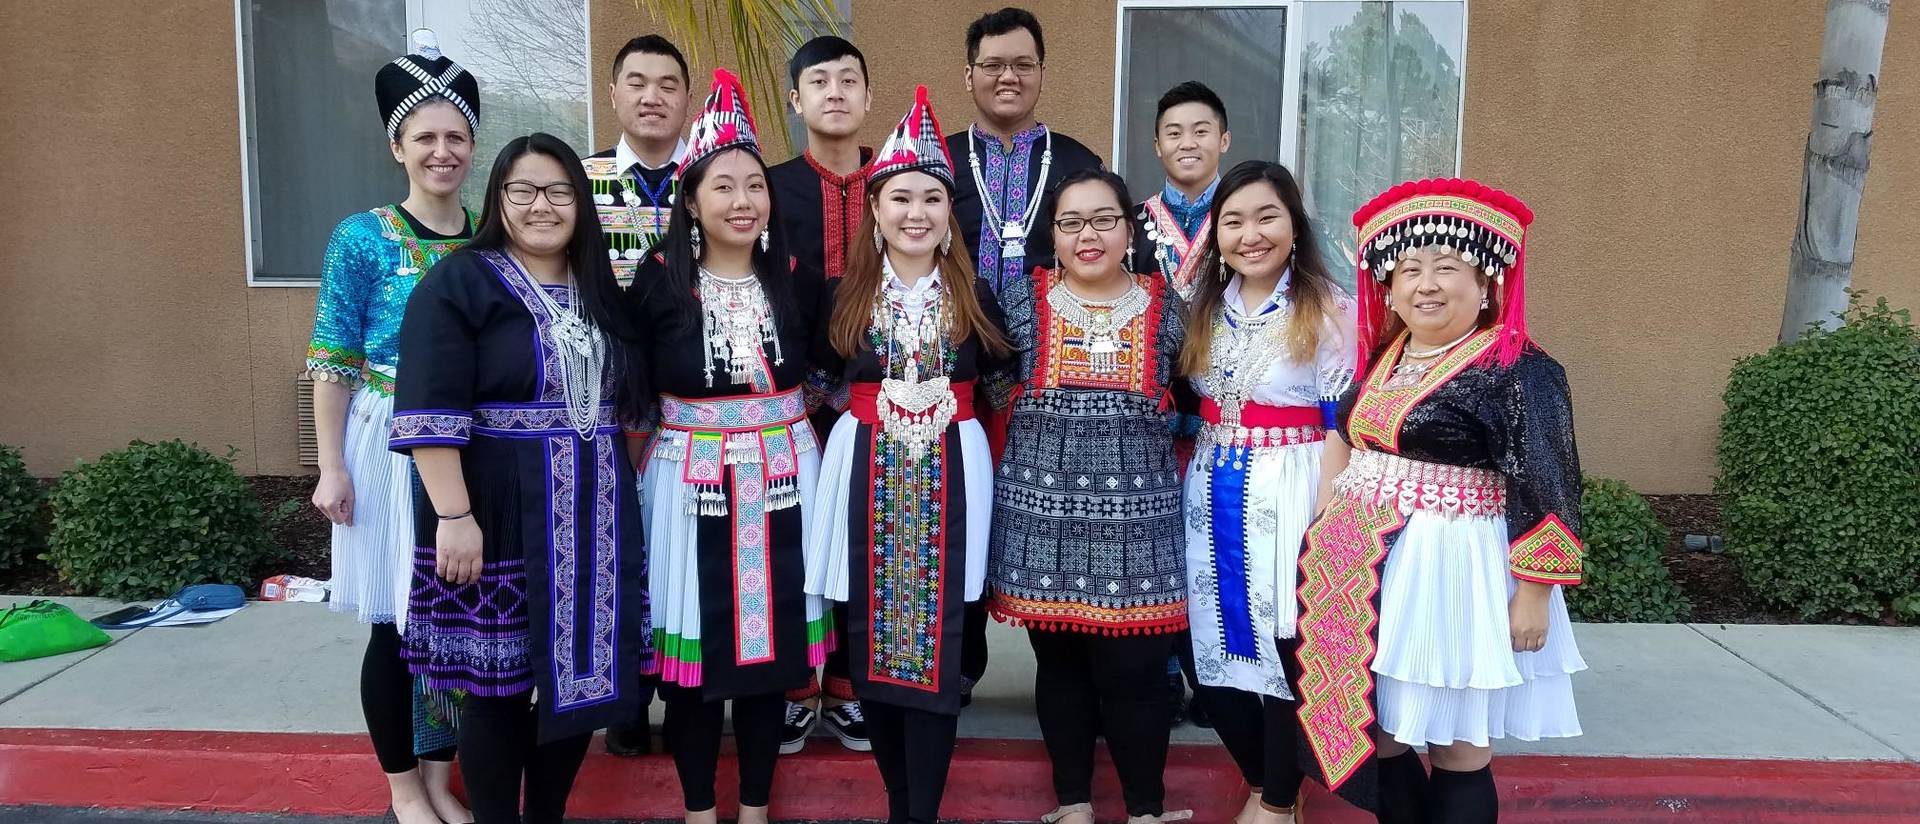 Students and faculty in traditional Hmong dress